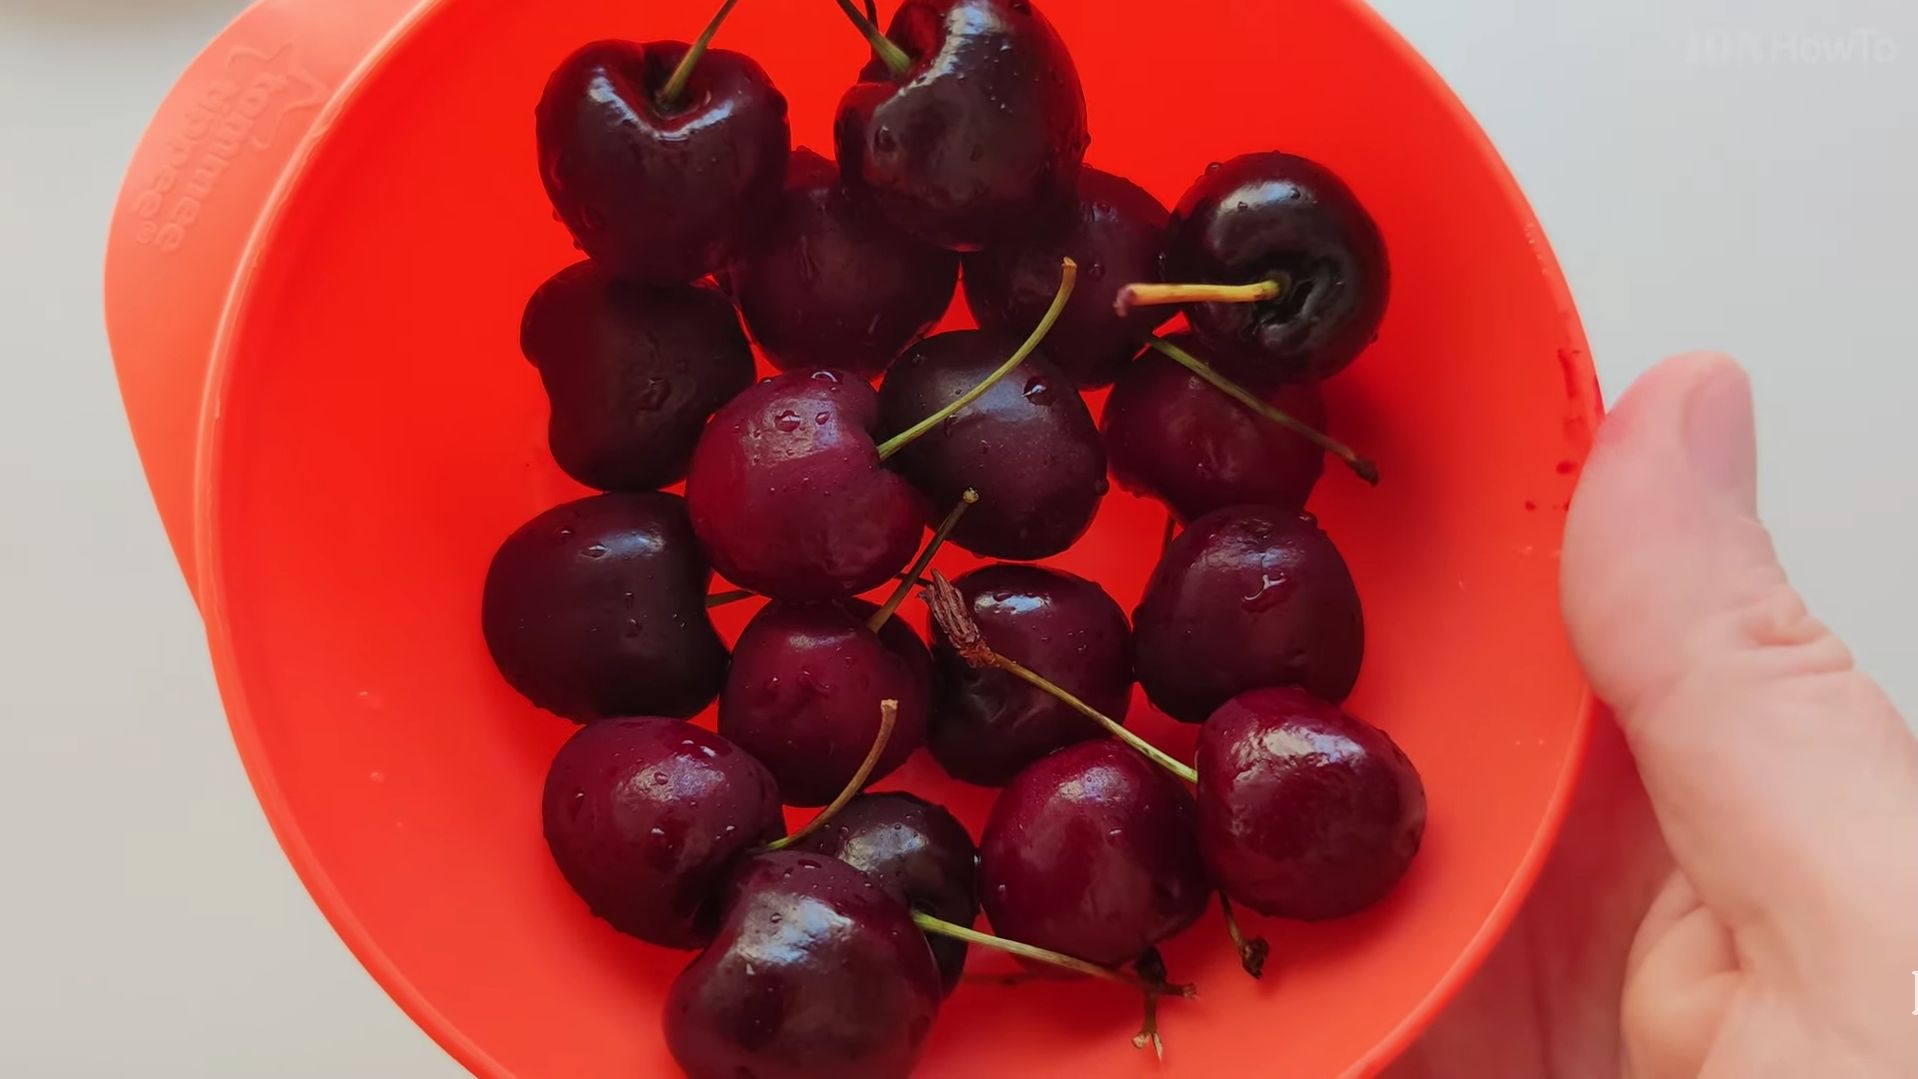 How to pit cherries without a cherry pitter